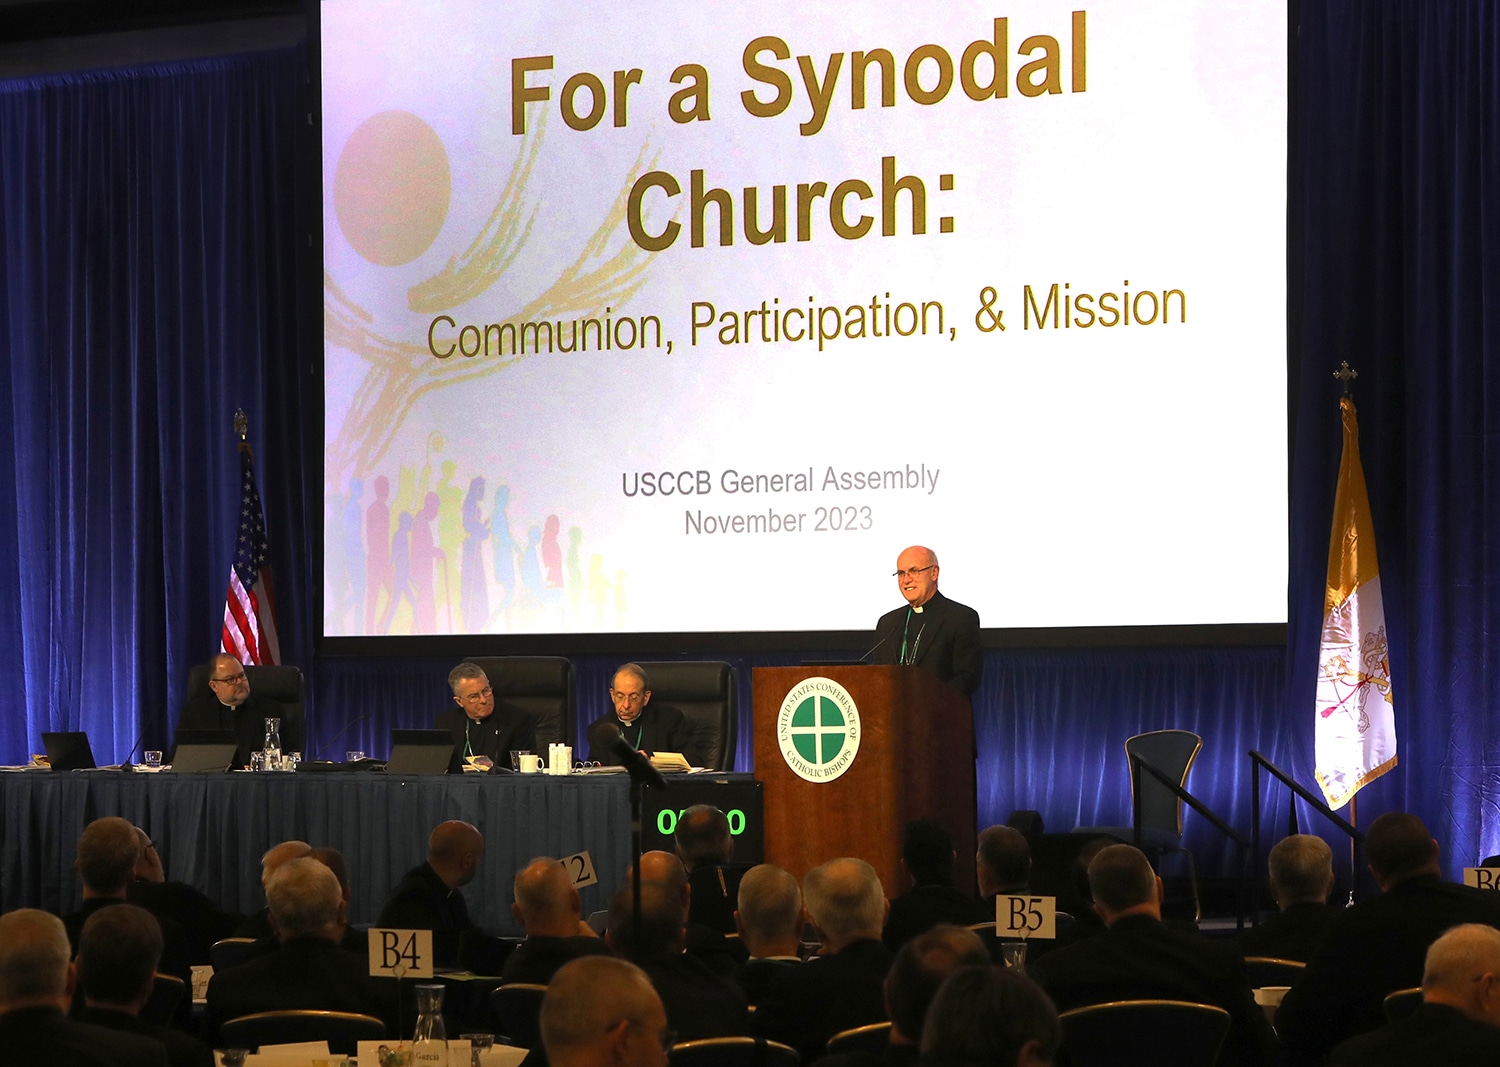 Synod Eucharist interconnected